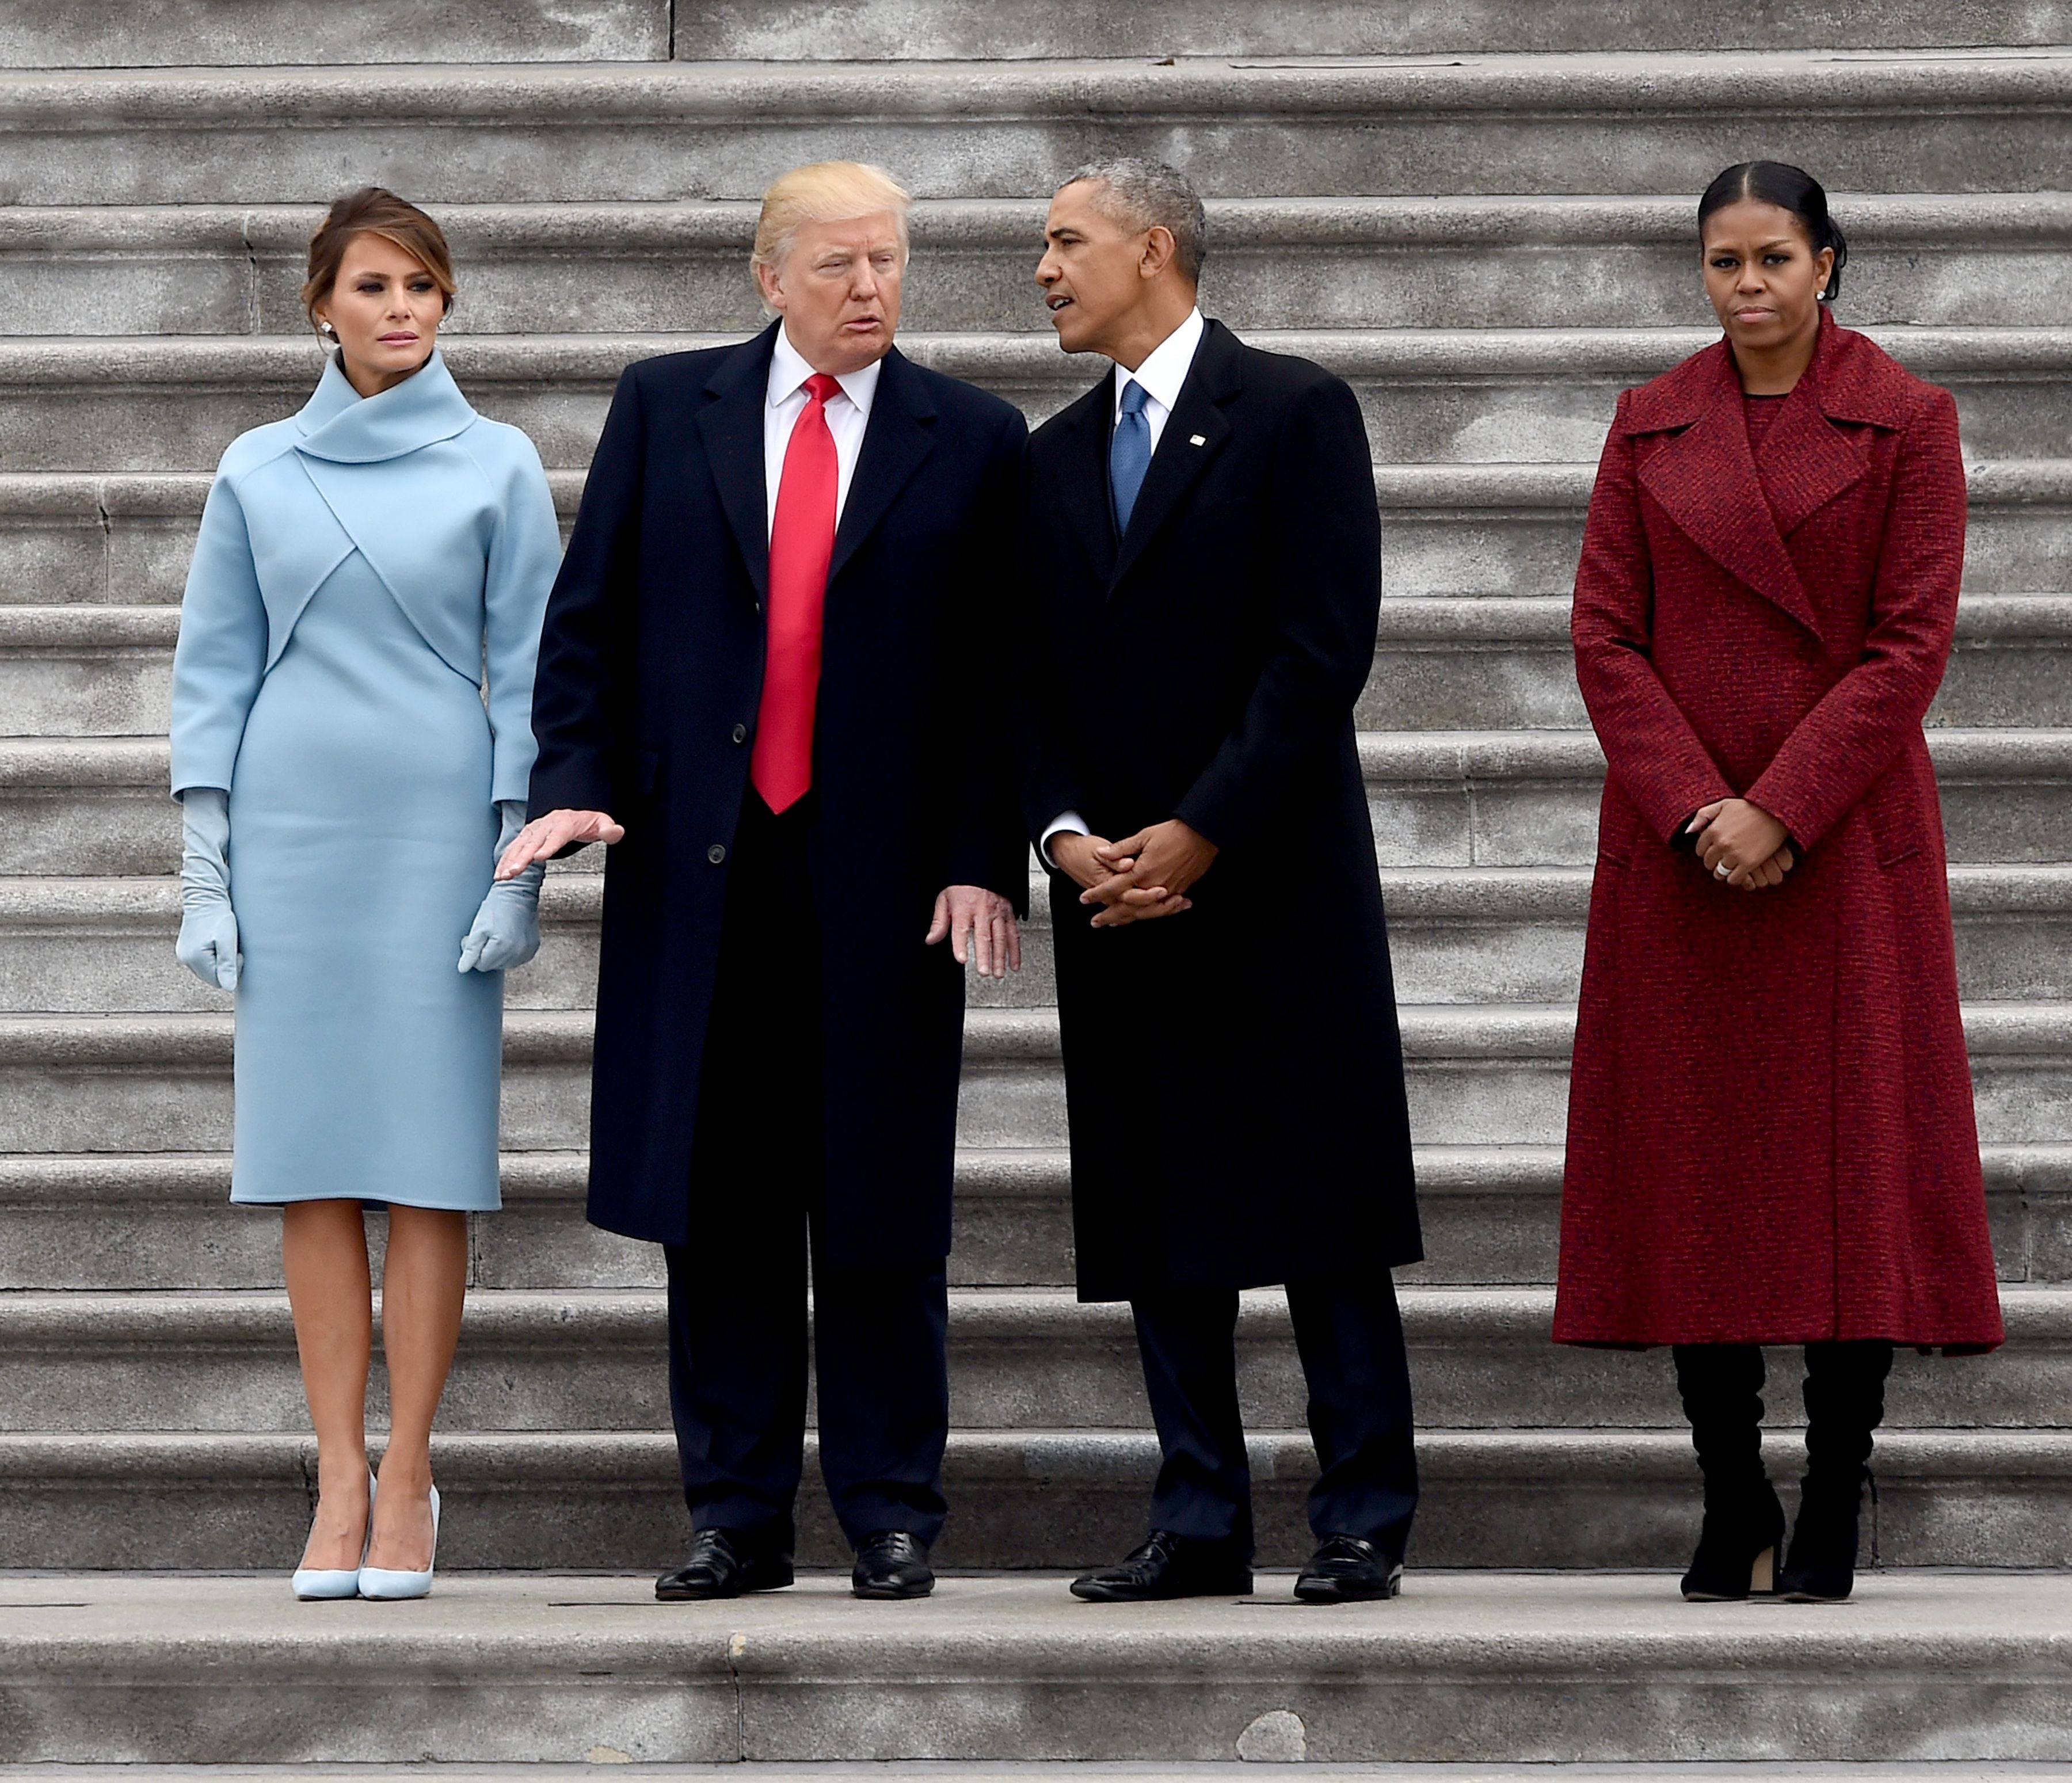 First Lady Melania Trump, President Donald Trump former President Barack Obama and Michelle on the East front steps of the US Capitol after inauguration ceremonies on January 20, 2017 in Washington, DC